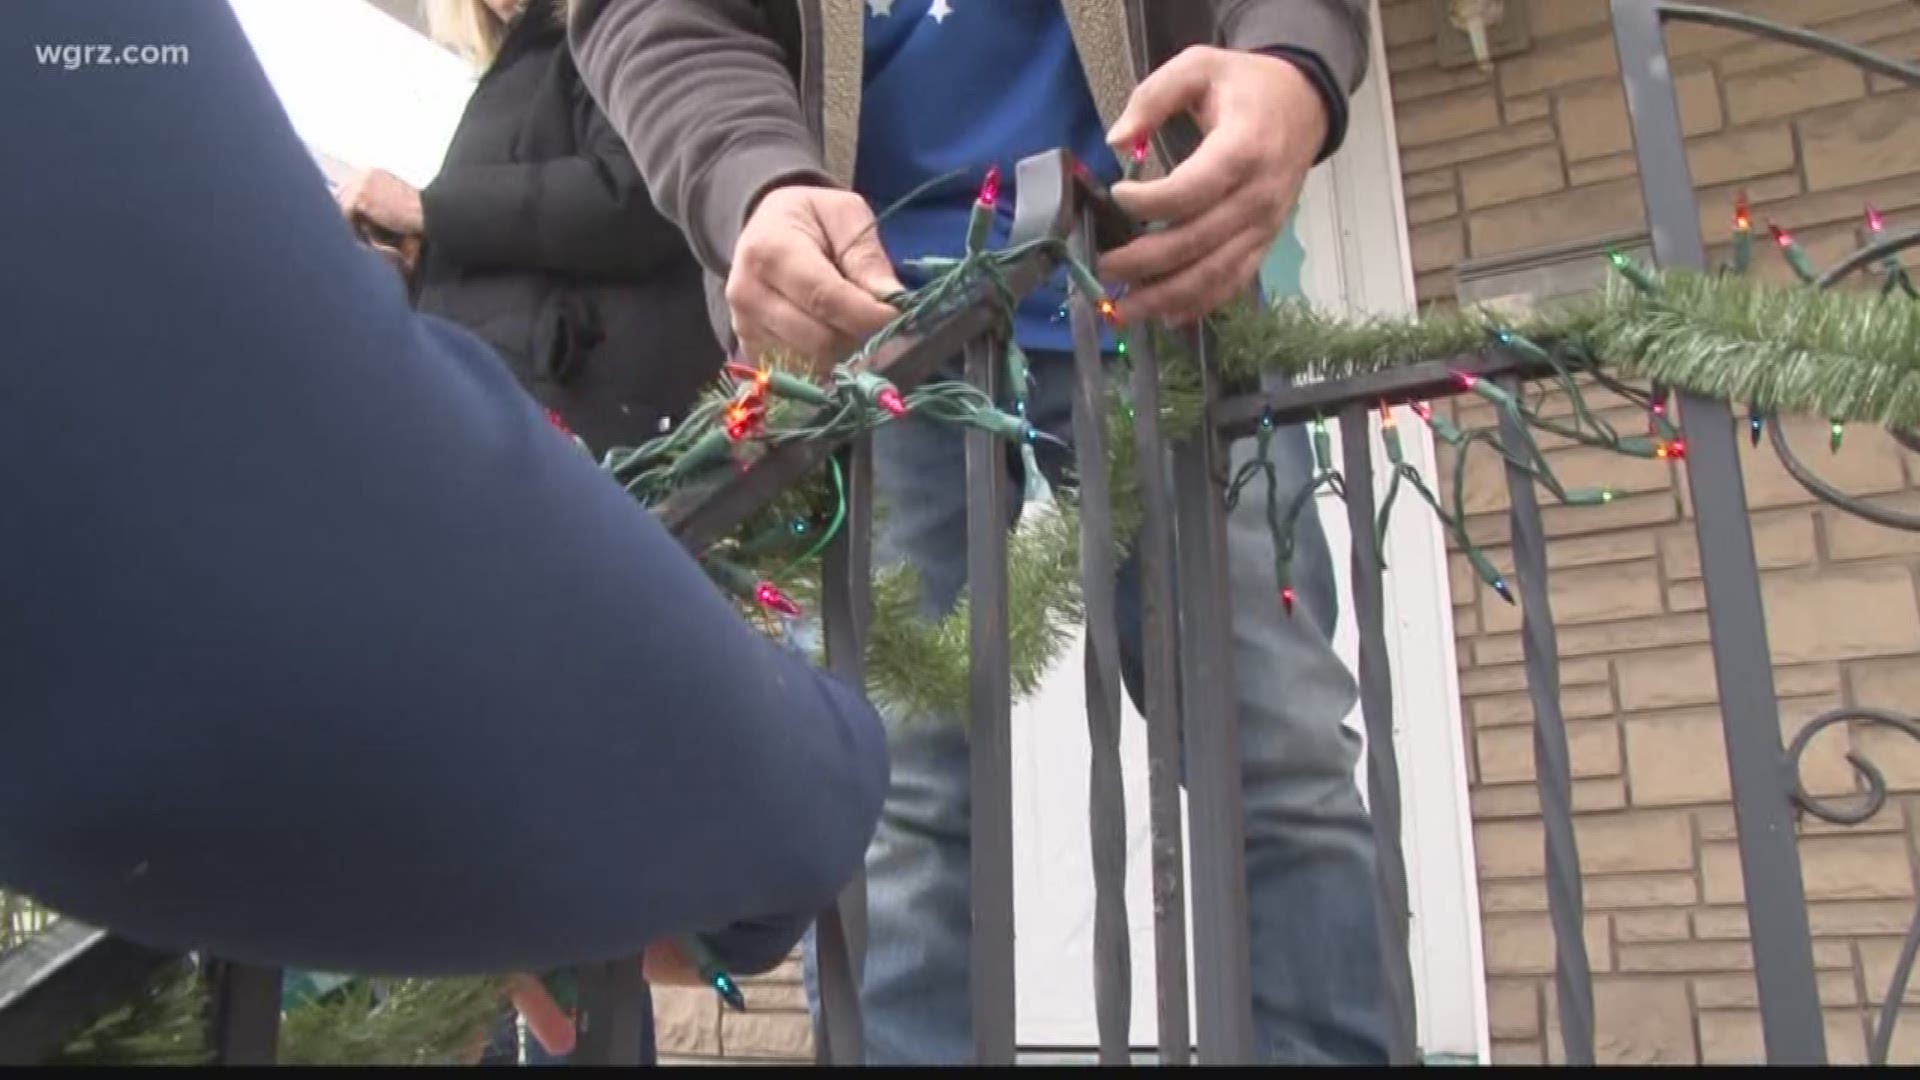 10th annual "City of Light" decorating event